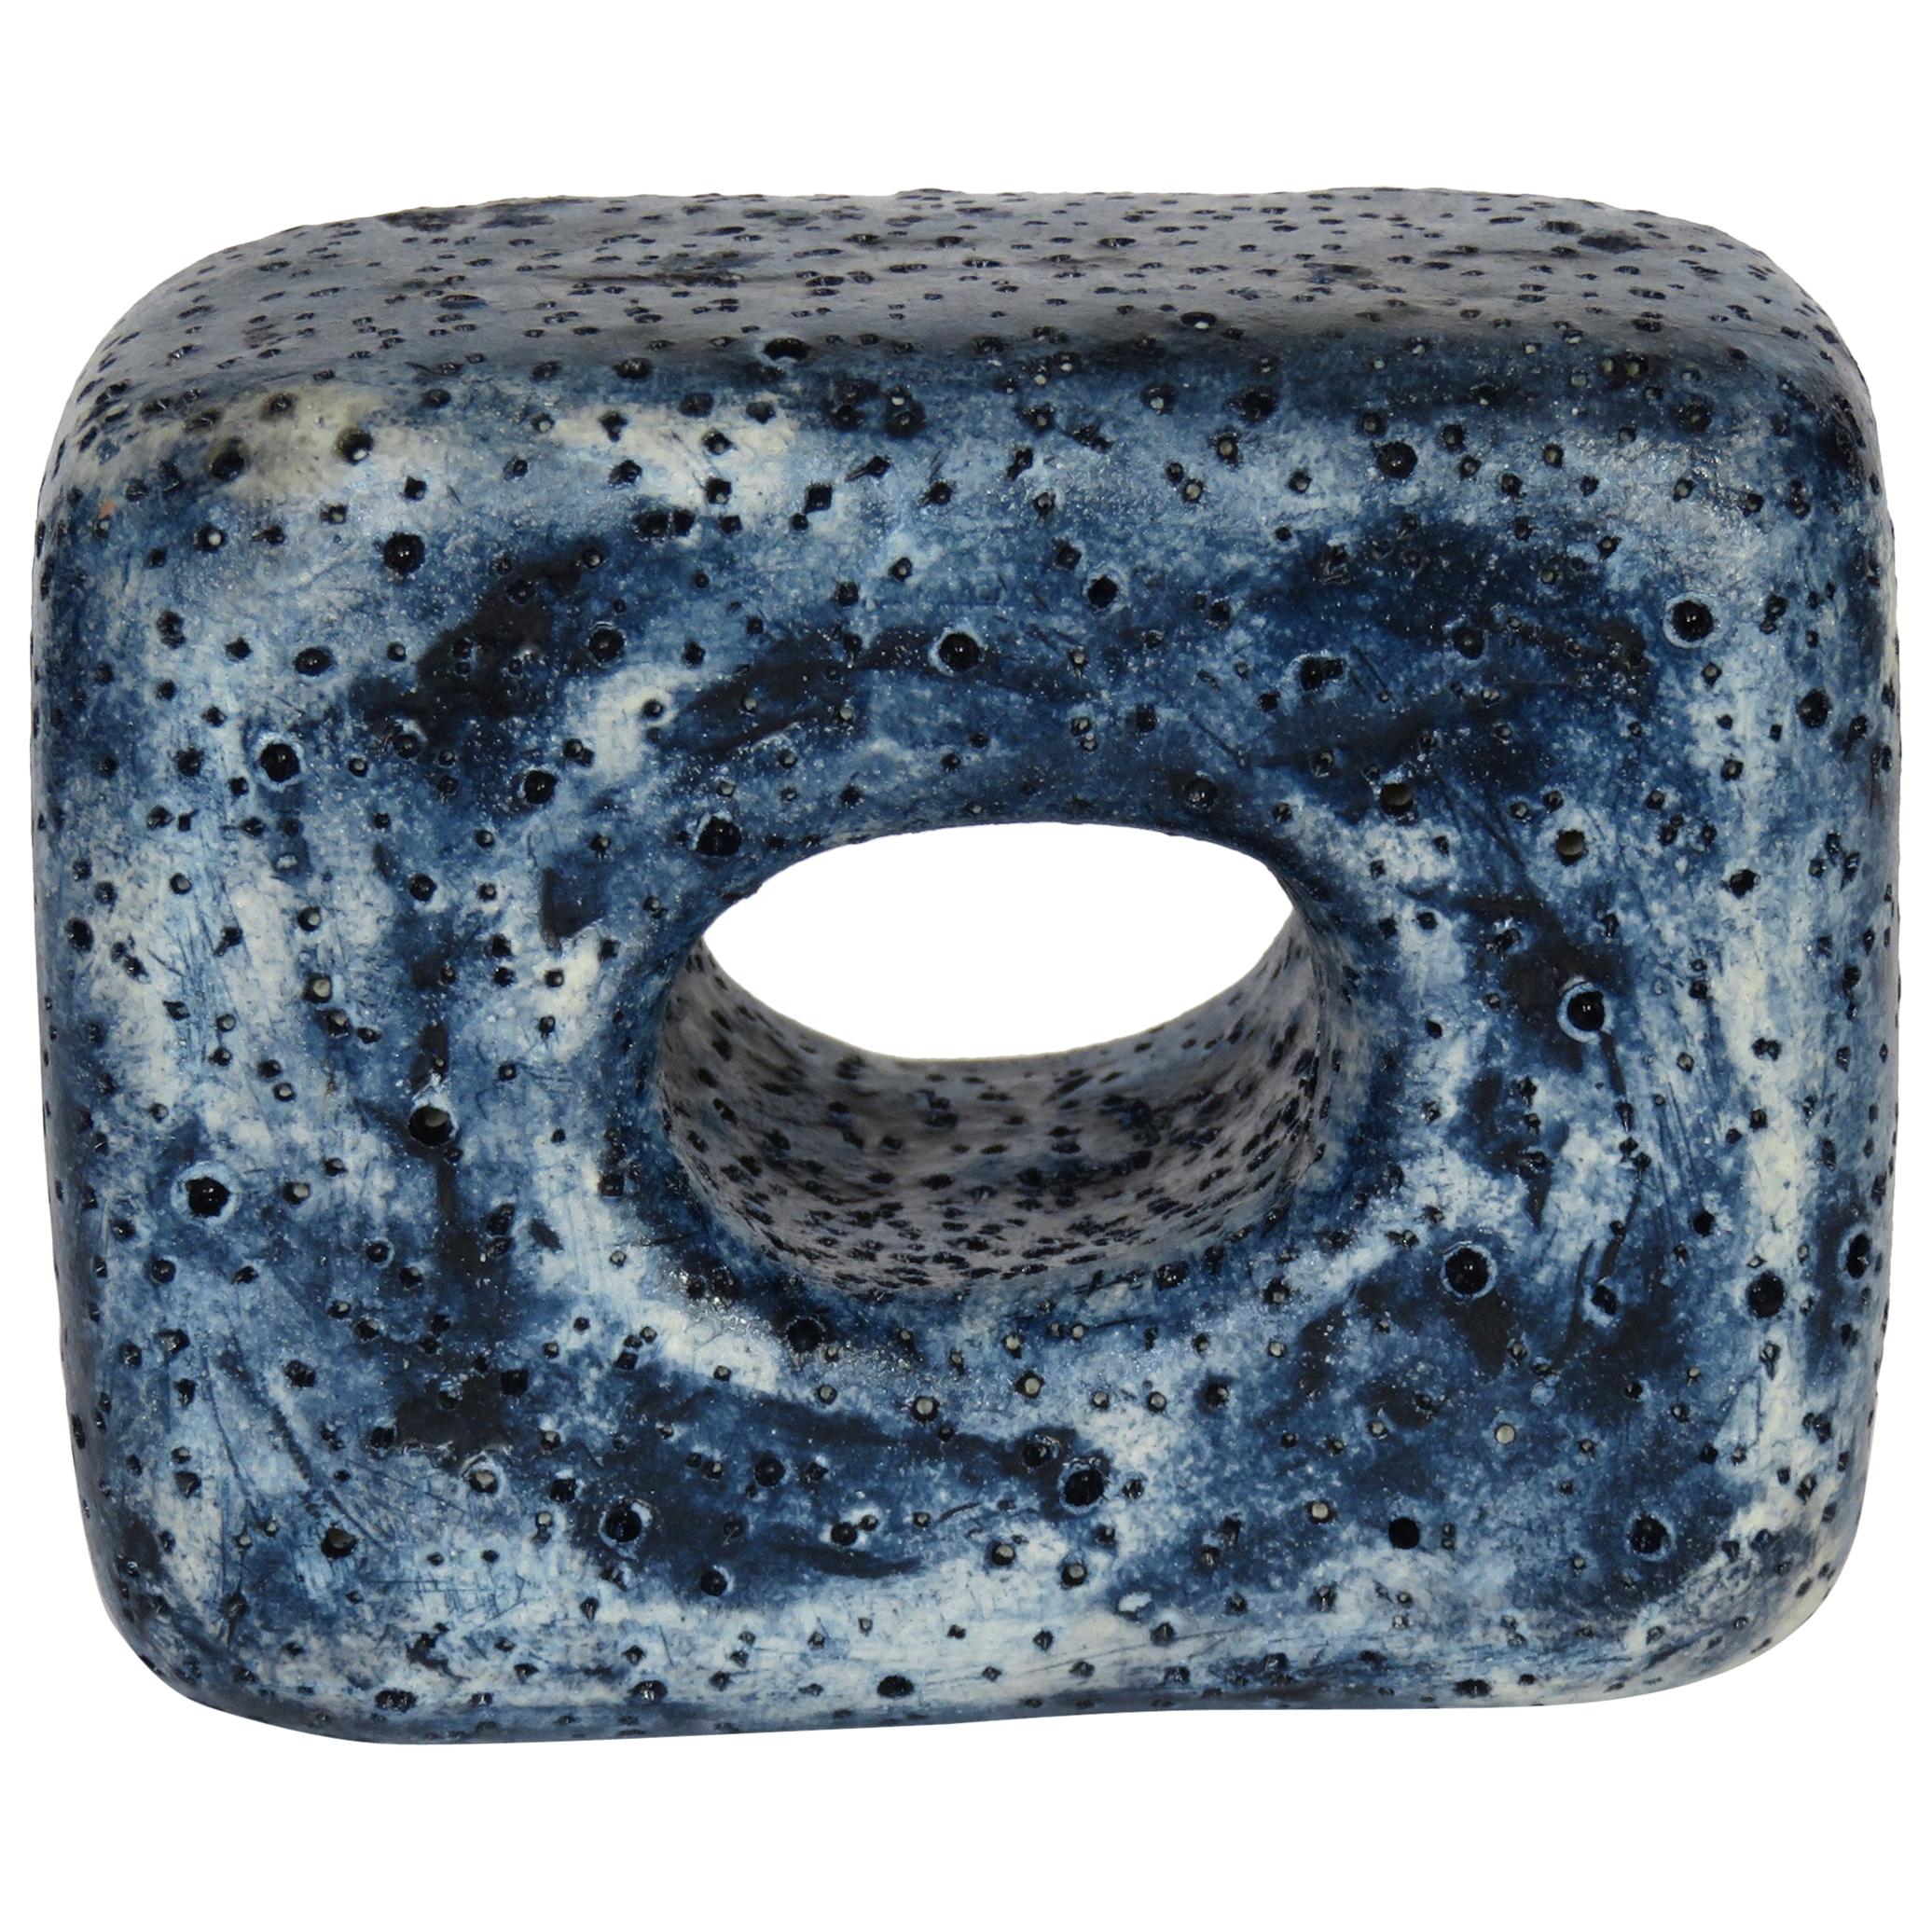 Hand Textured Ceramic Sculpture, Oblong Cube with Oval Opening in Deep Blue Wash